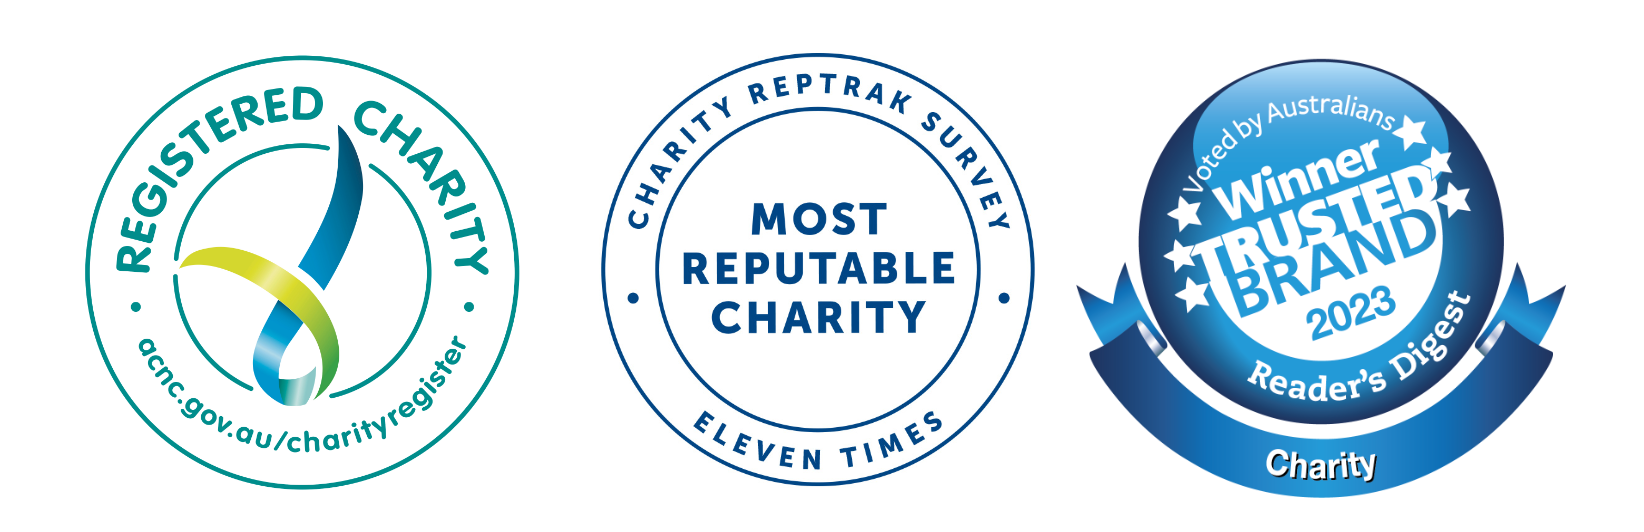 ACNC registered charity, Eleven Times most reputable charity, and Readers Digest 2023 trusted brand winner.